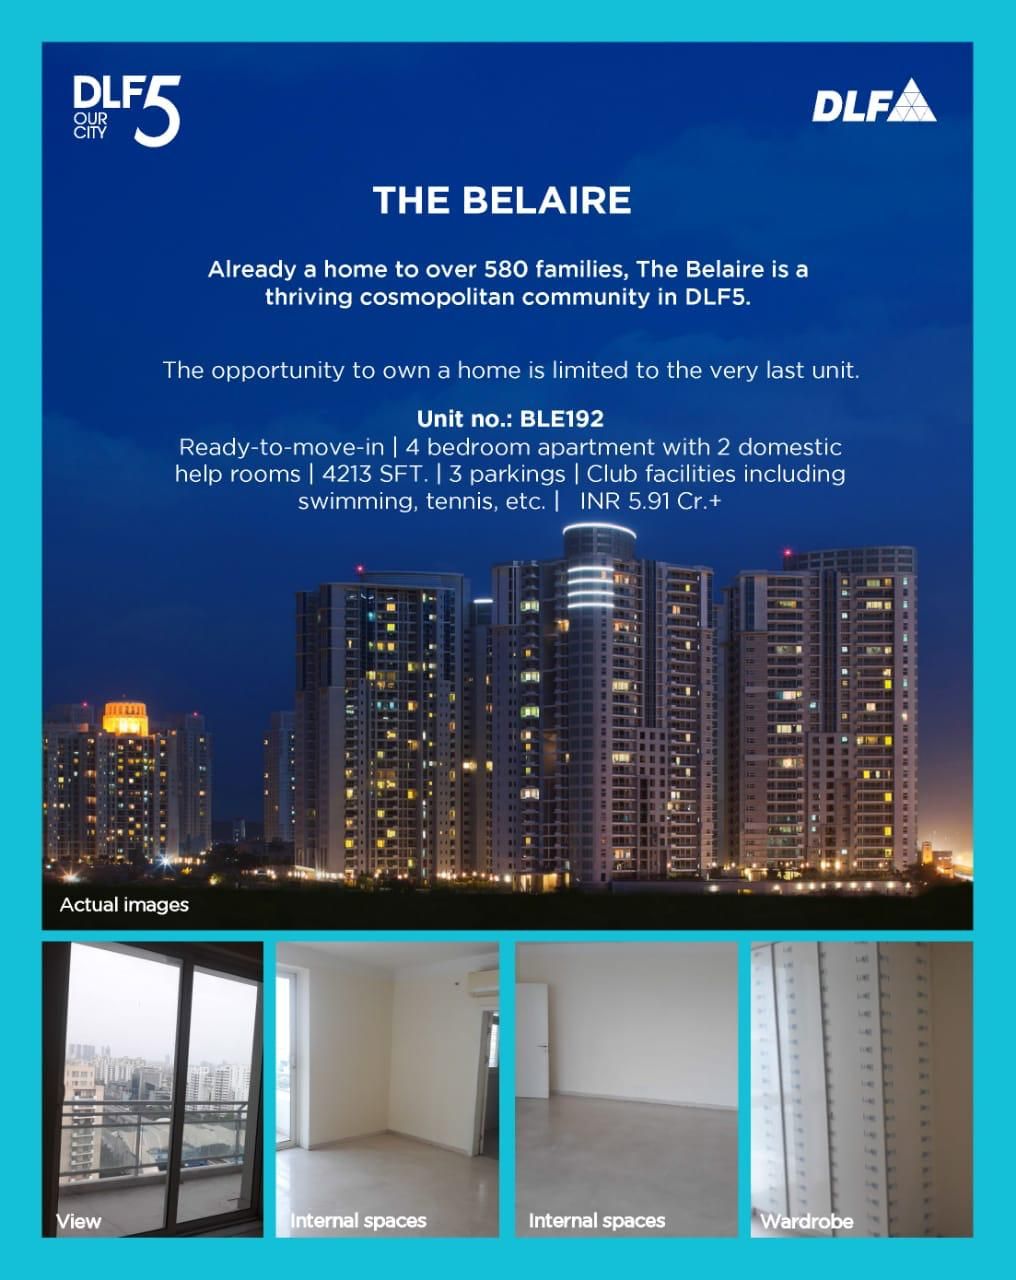 Already a home to over 580 families, The Belaire is a thriving cosmopolitan community in DLF - 5, Gurgaon